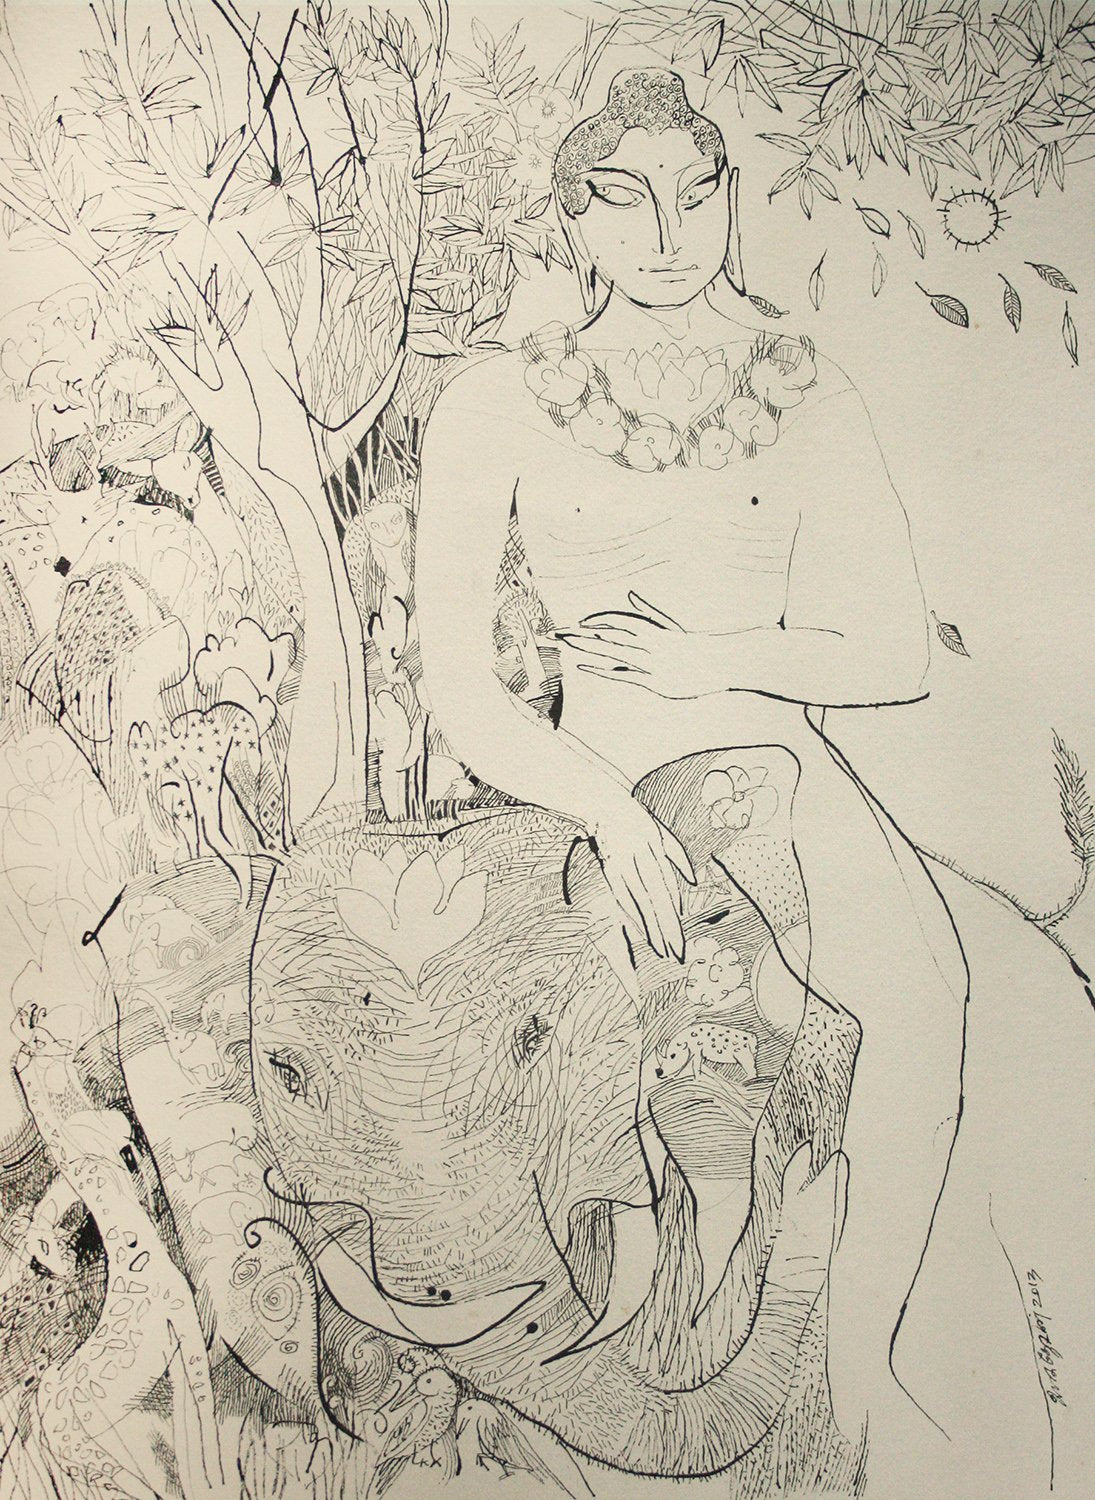 Beside of my dream 84|A. Vasudevan- Pen and Ink on Board, 2013, 30 x 22 inches